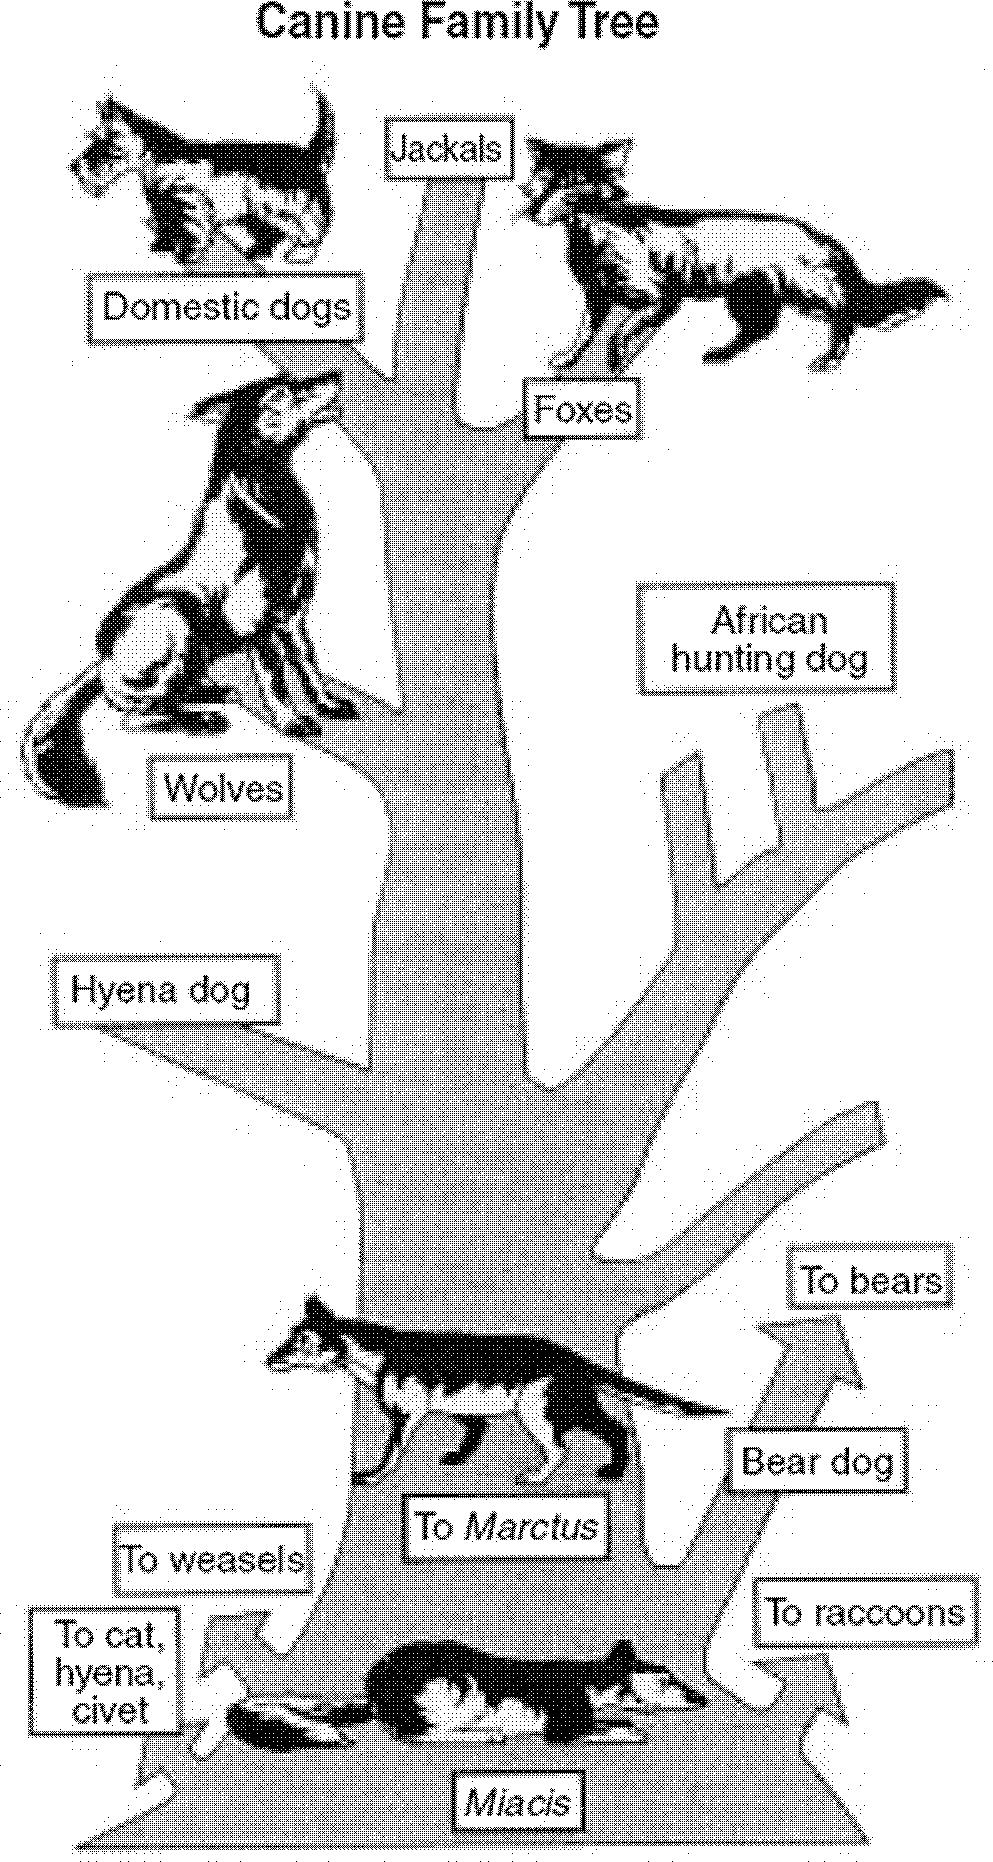 14. Base your answer(s) to the following question(s) on the diagram, which represents the relationships between animals in a possible canine family tree, and on your knowledge of biology. 17.